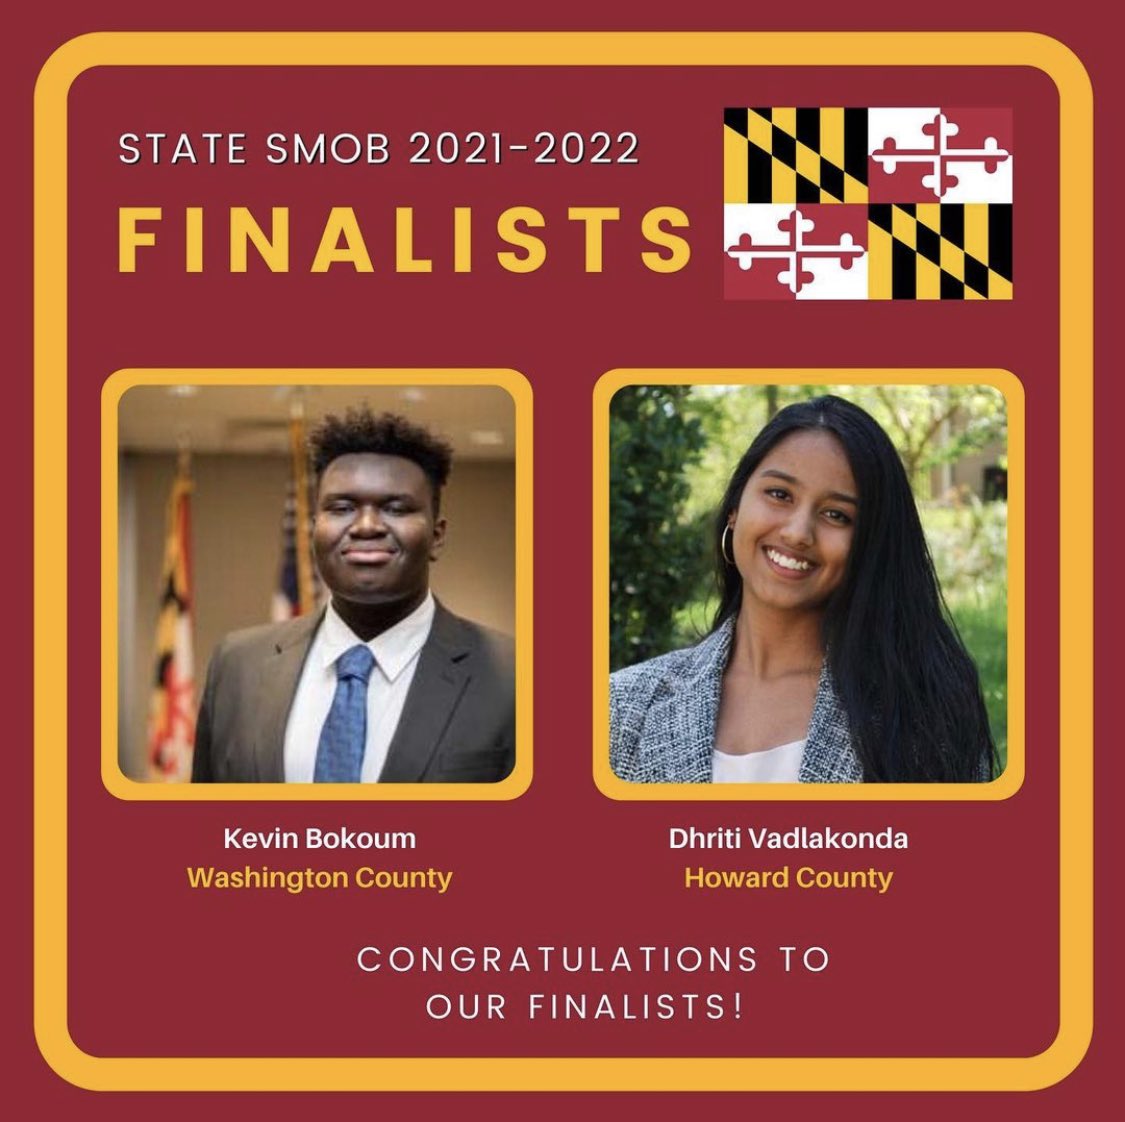 Hello everyone! I am beyond privileged and honored to announce that I was elected by the Maryland Association of Student Councils as one of the top two finalists to be sent to Governor Hogan for appointment to the Maryland SMOB position. #studentsfirst #hubpride